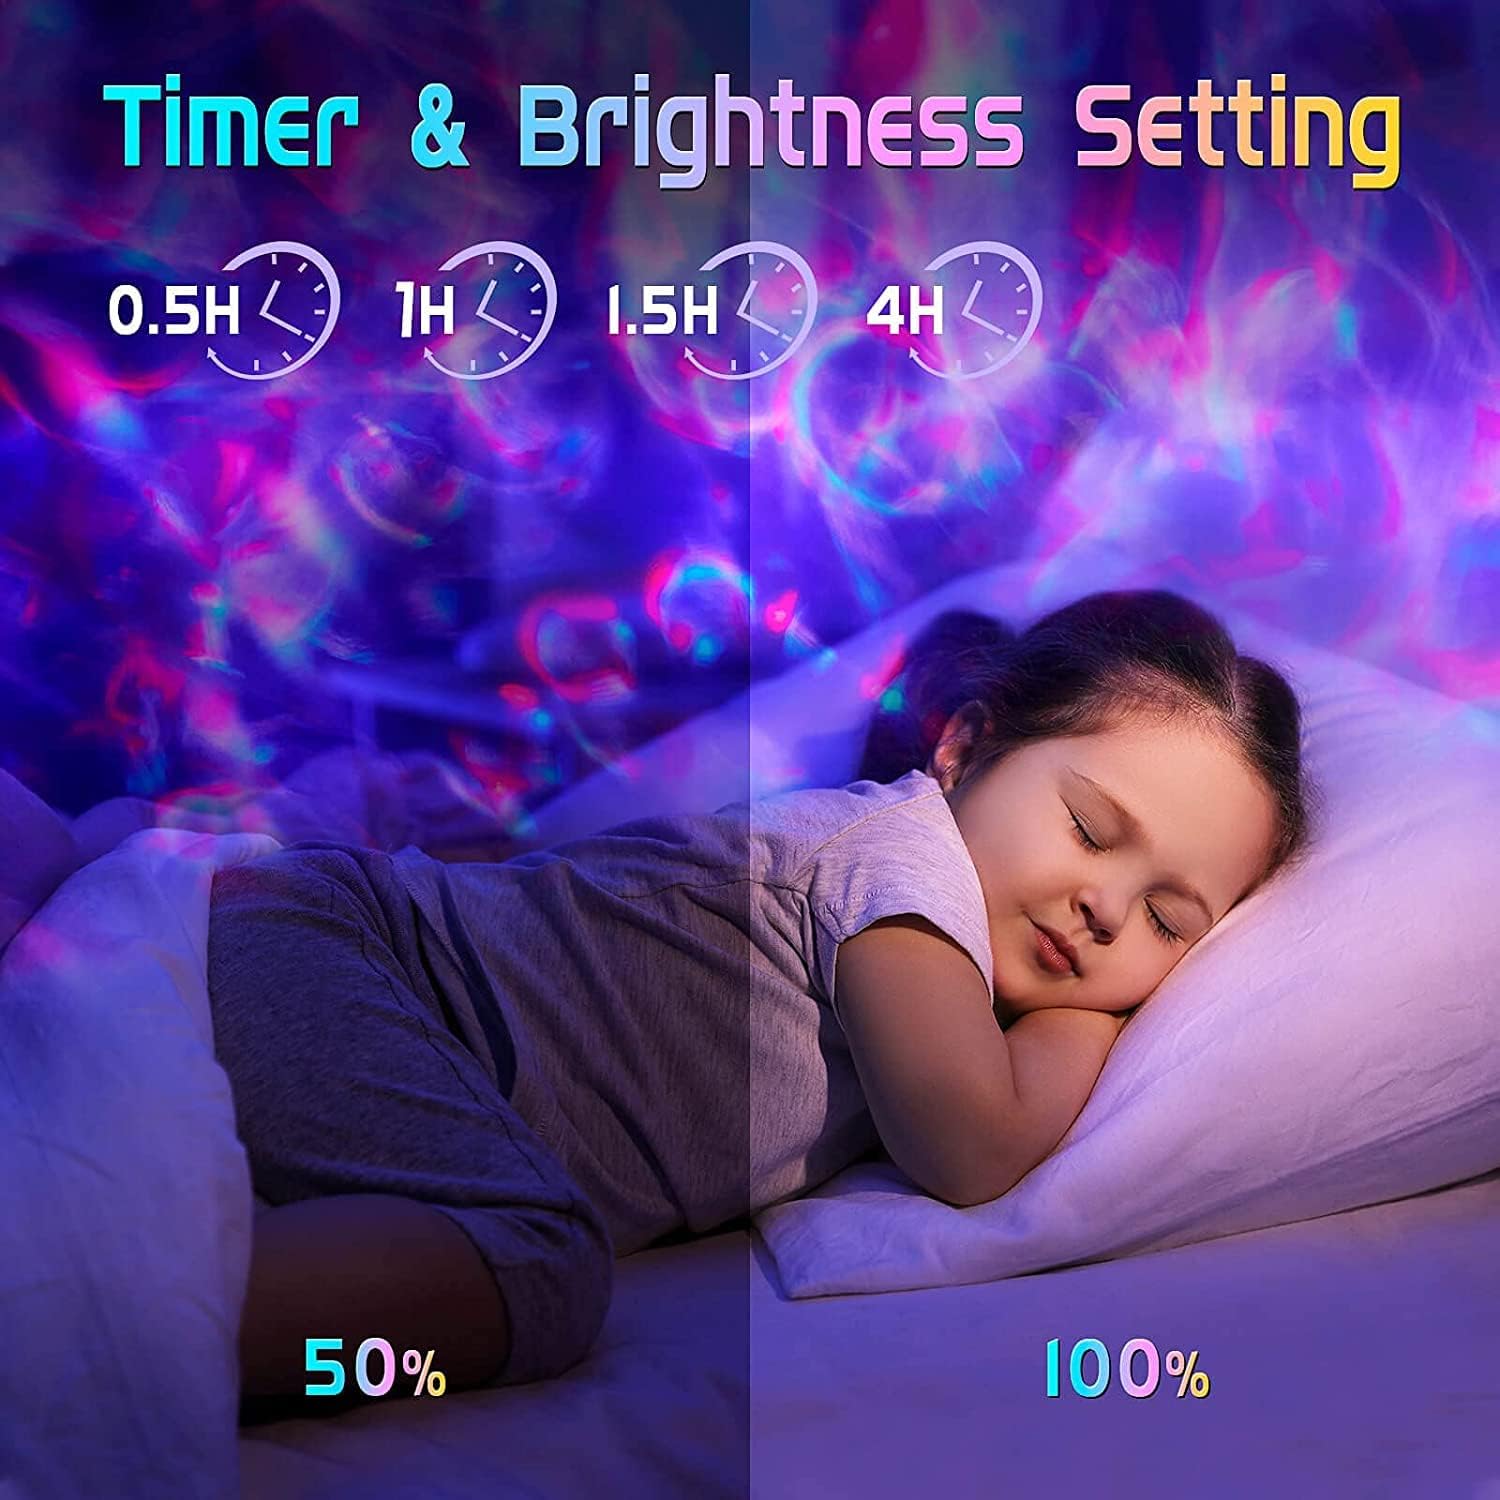 Galaxy Projector 20 Lighting Modes Star Projector, HiFi Bluetooth Speaker Galaxy Projector Light, 6 White Noise Sensory Lights, Remote & Timer Galaxy Light Projector for Bedroom Gifts for Room Decor [Energy Class A] 5